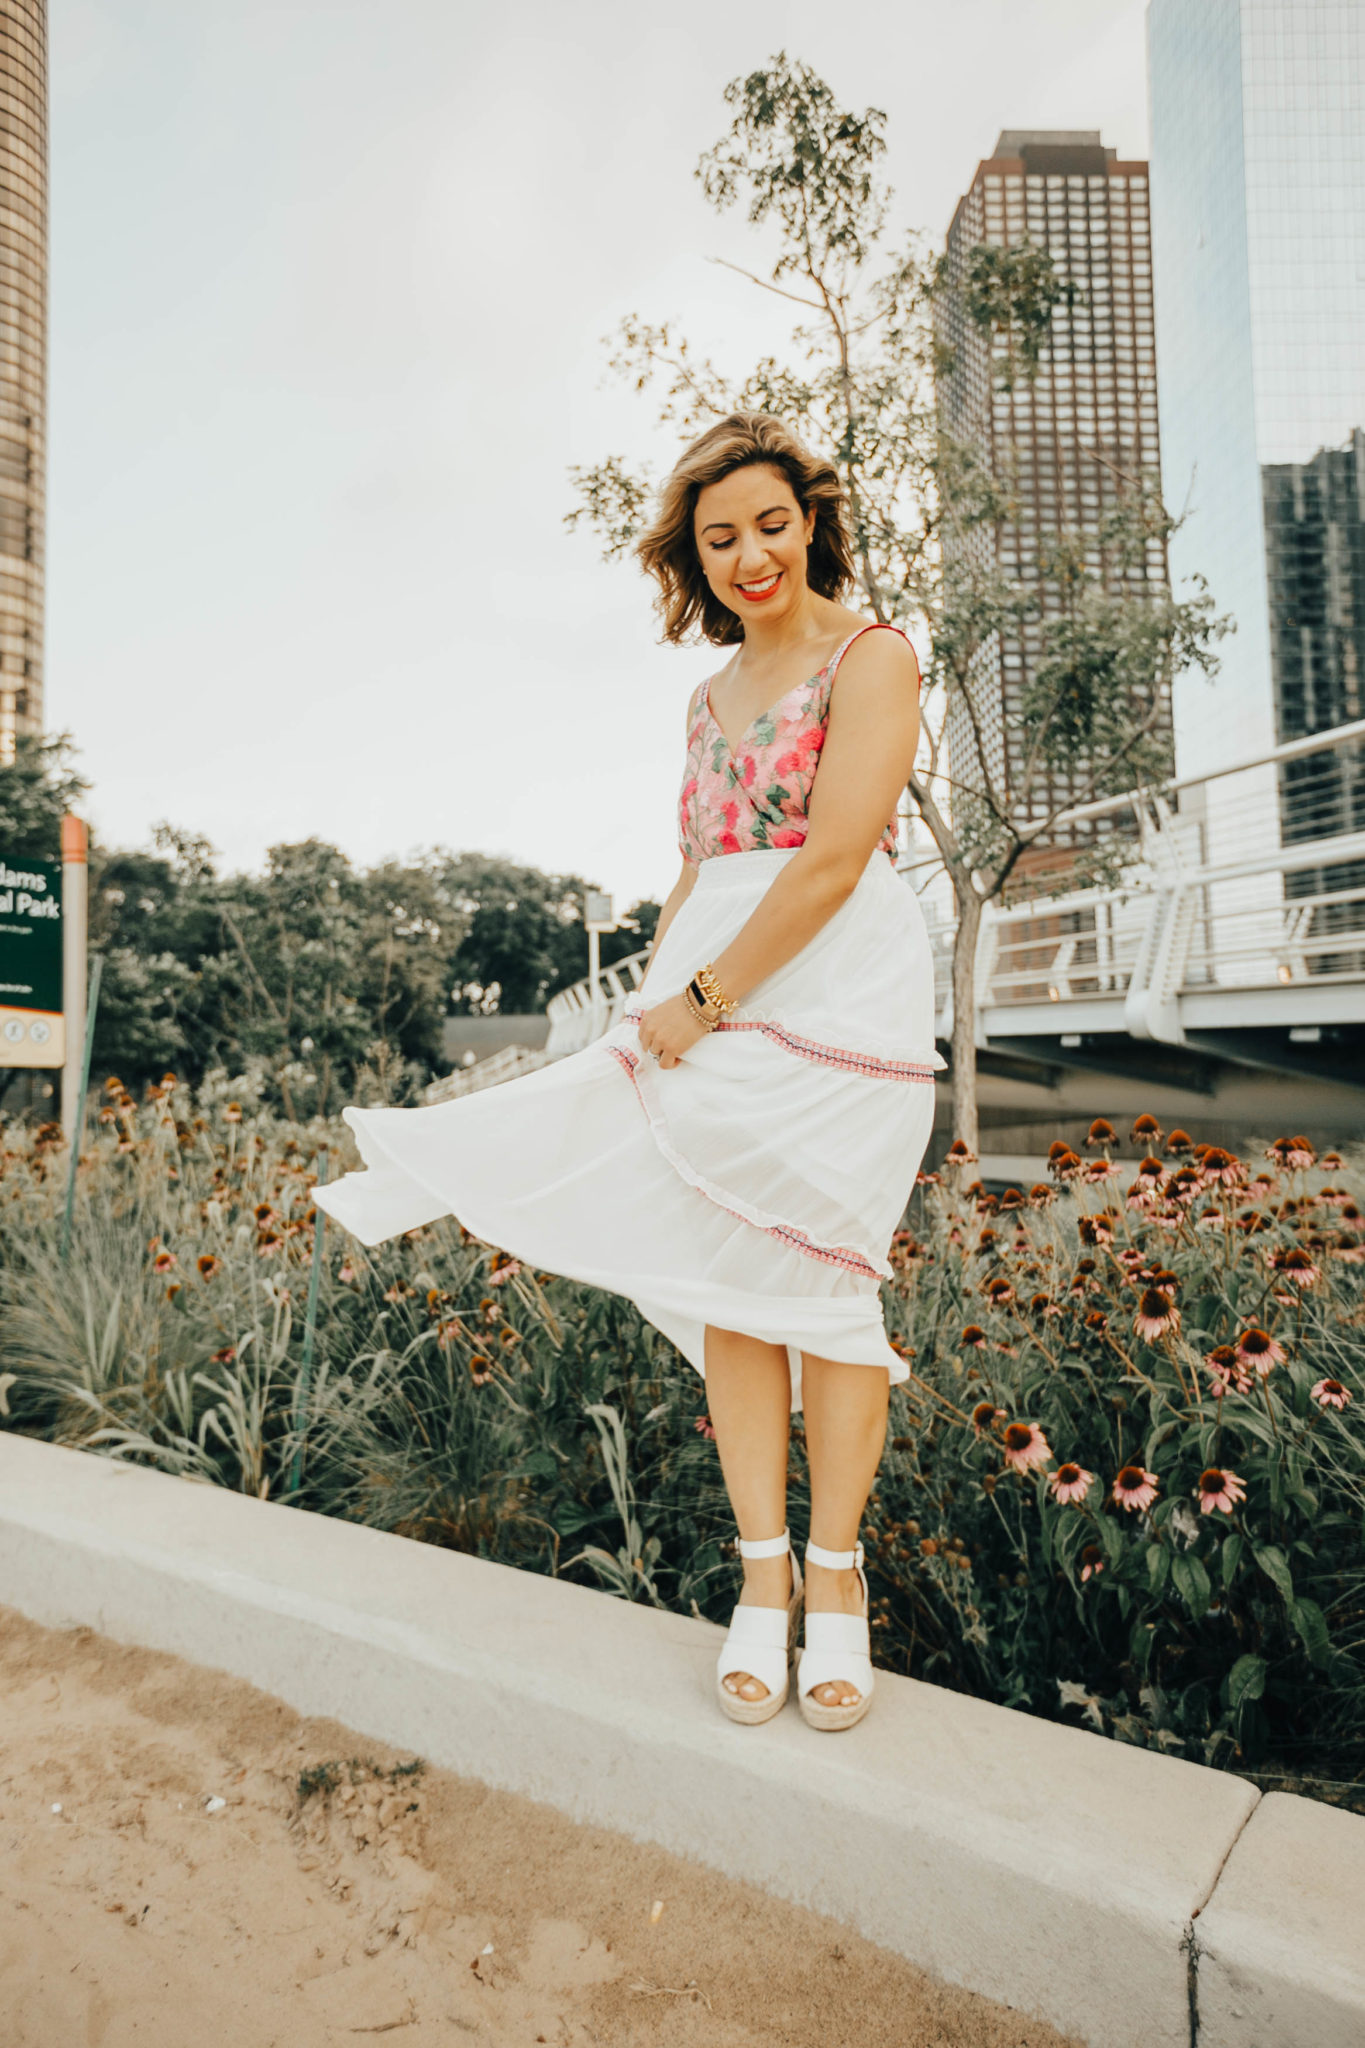 Jump Into The Dead Flowers | Floral Embroidered Dress & On Mondays We Link Up (#76) featured by popular Chicago fashion blogger Glass of Glam